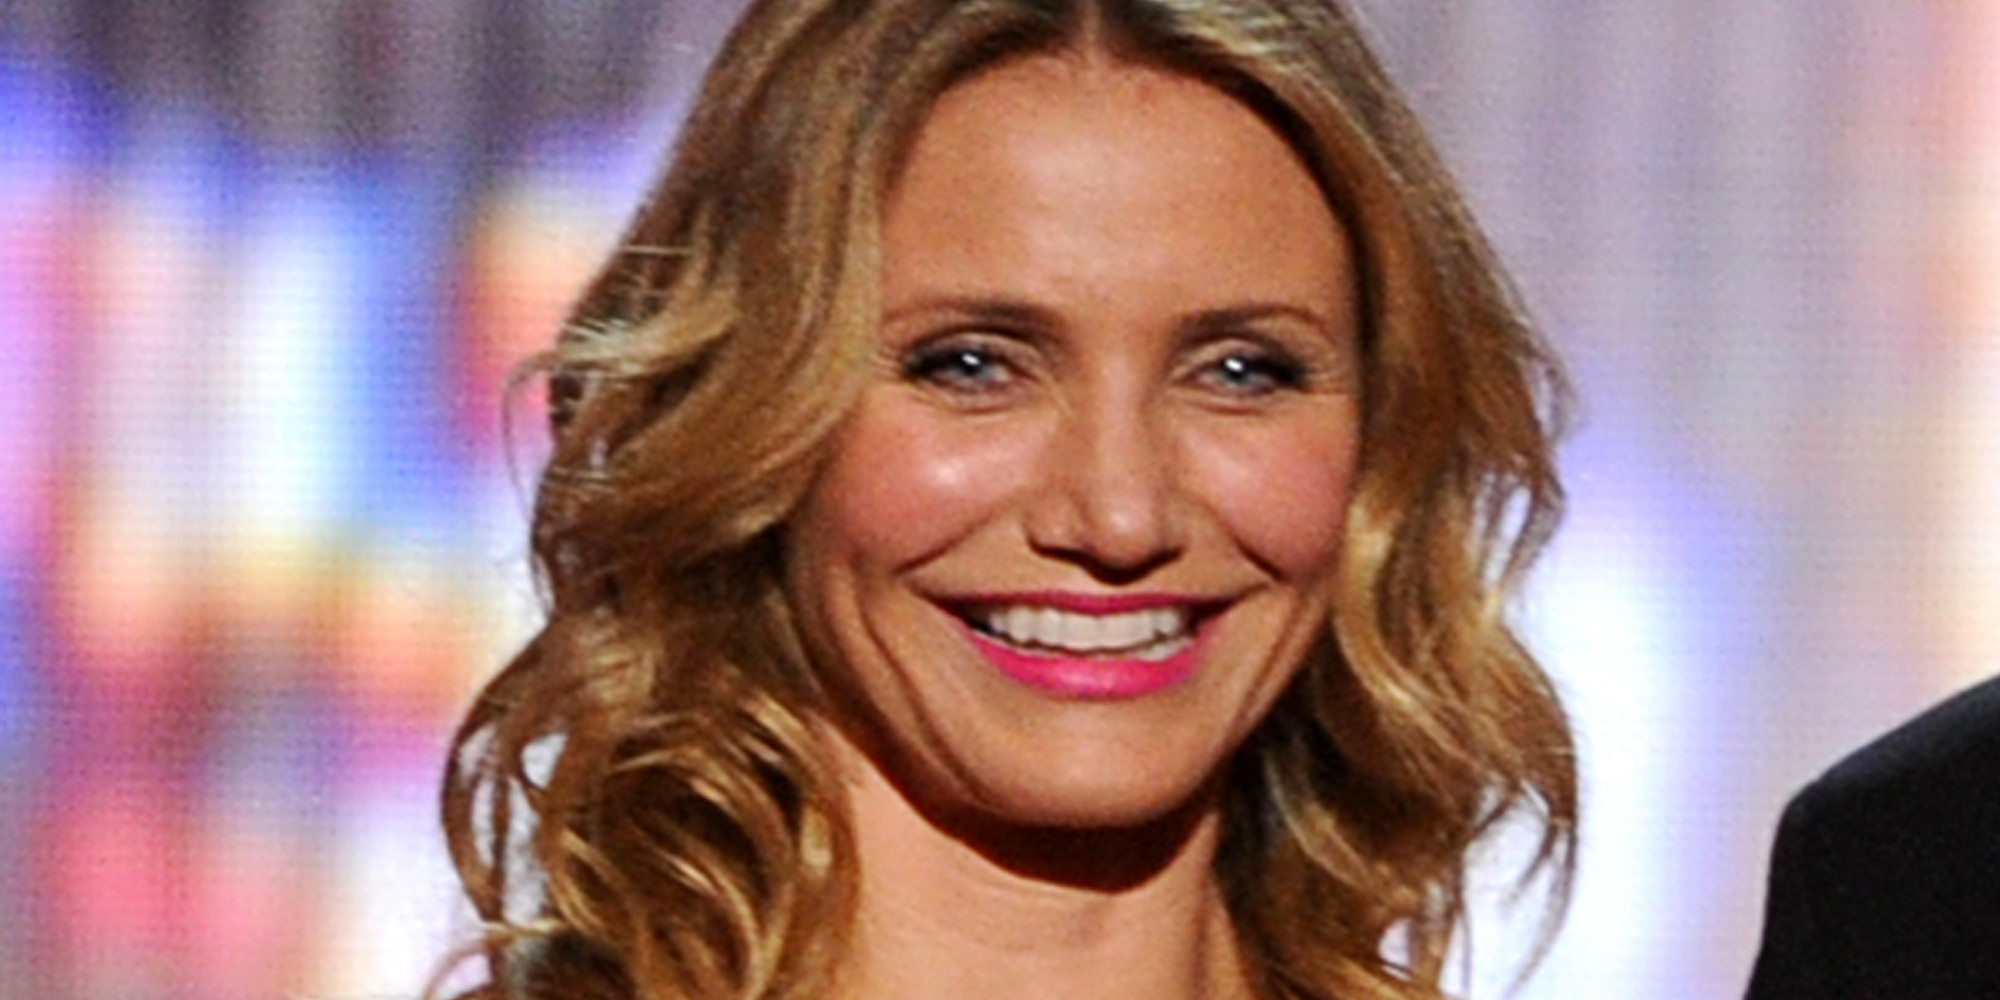 10 Things You Didnt Know About Sex Tape Star Cameron Diaz Huffpost